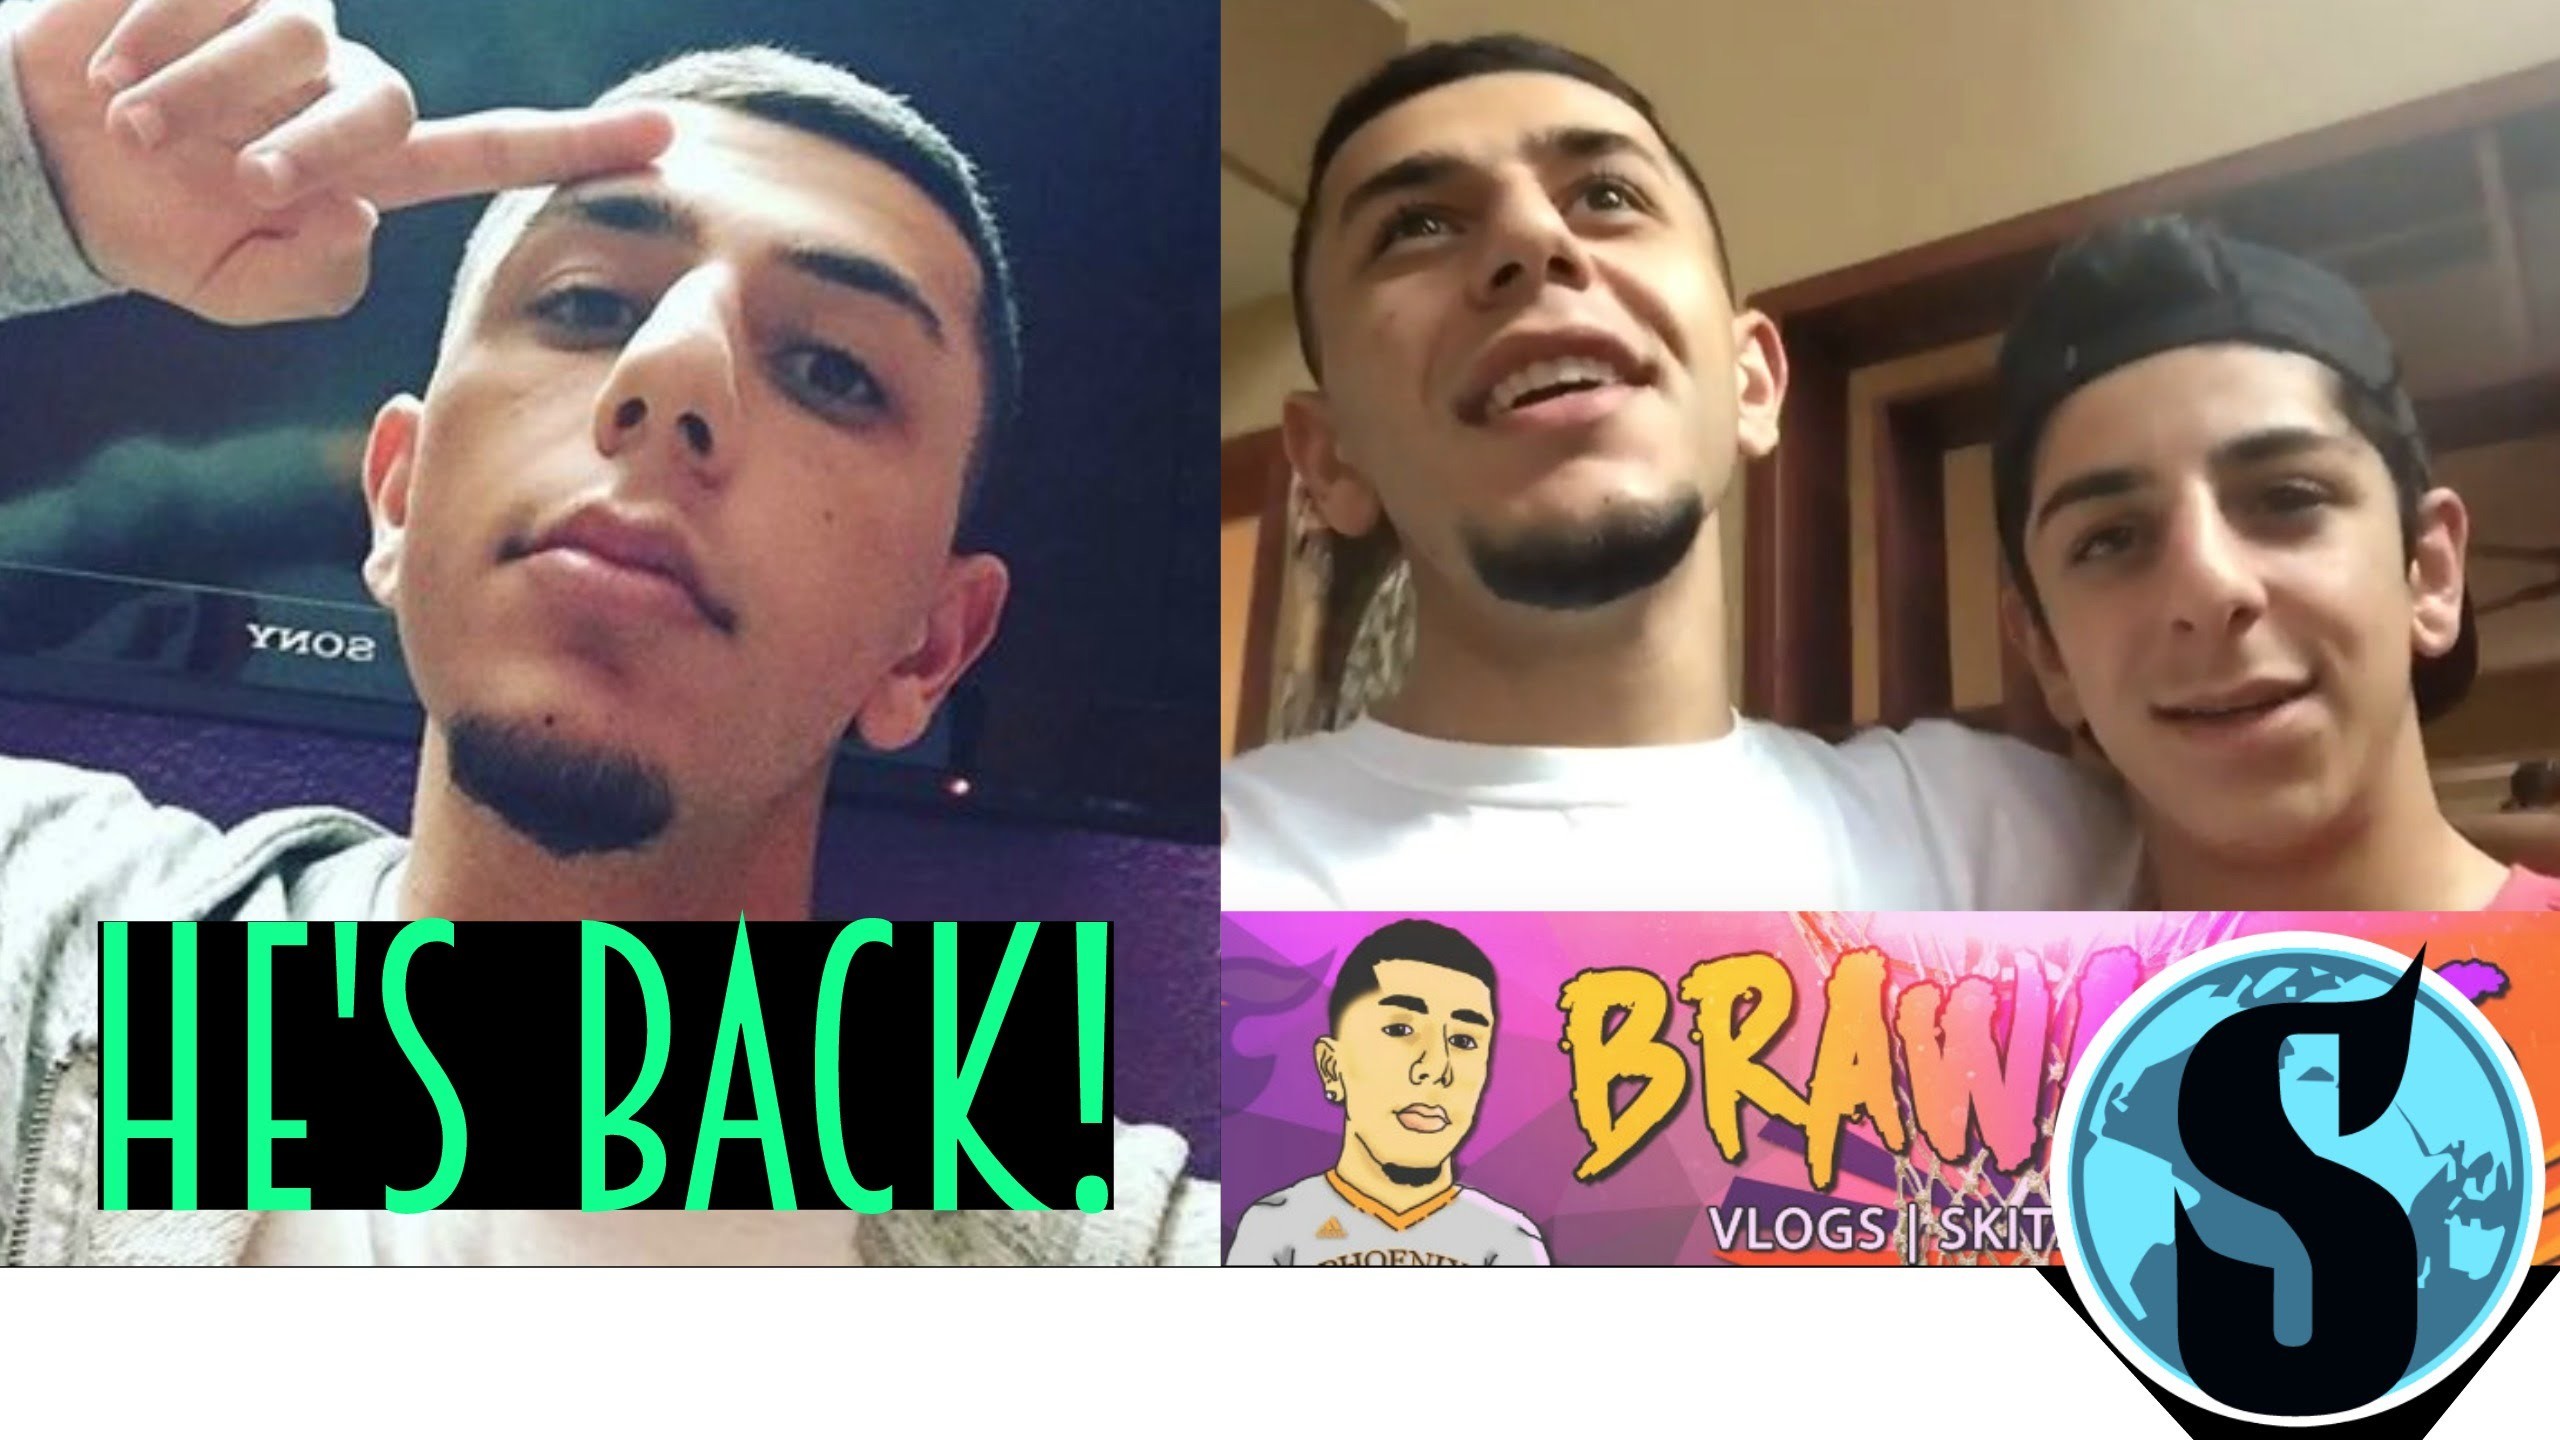 2560x1440 Brawadis Gets His YouTube & Twitter Back; Uploads New Video With FaZe Rug